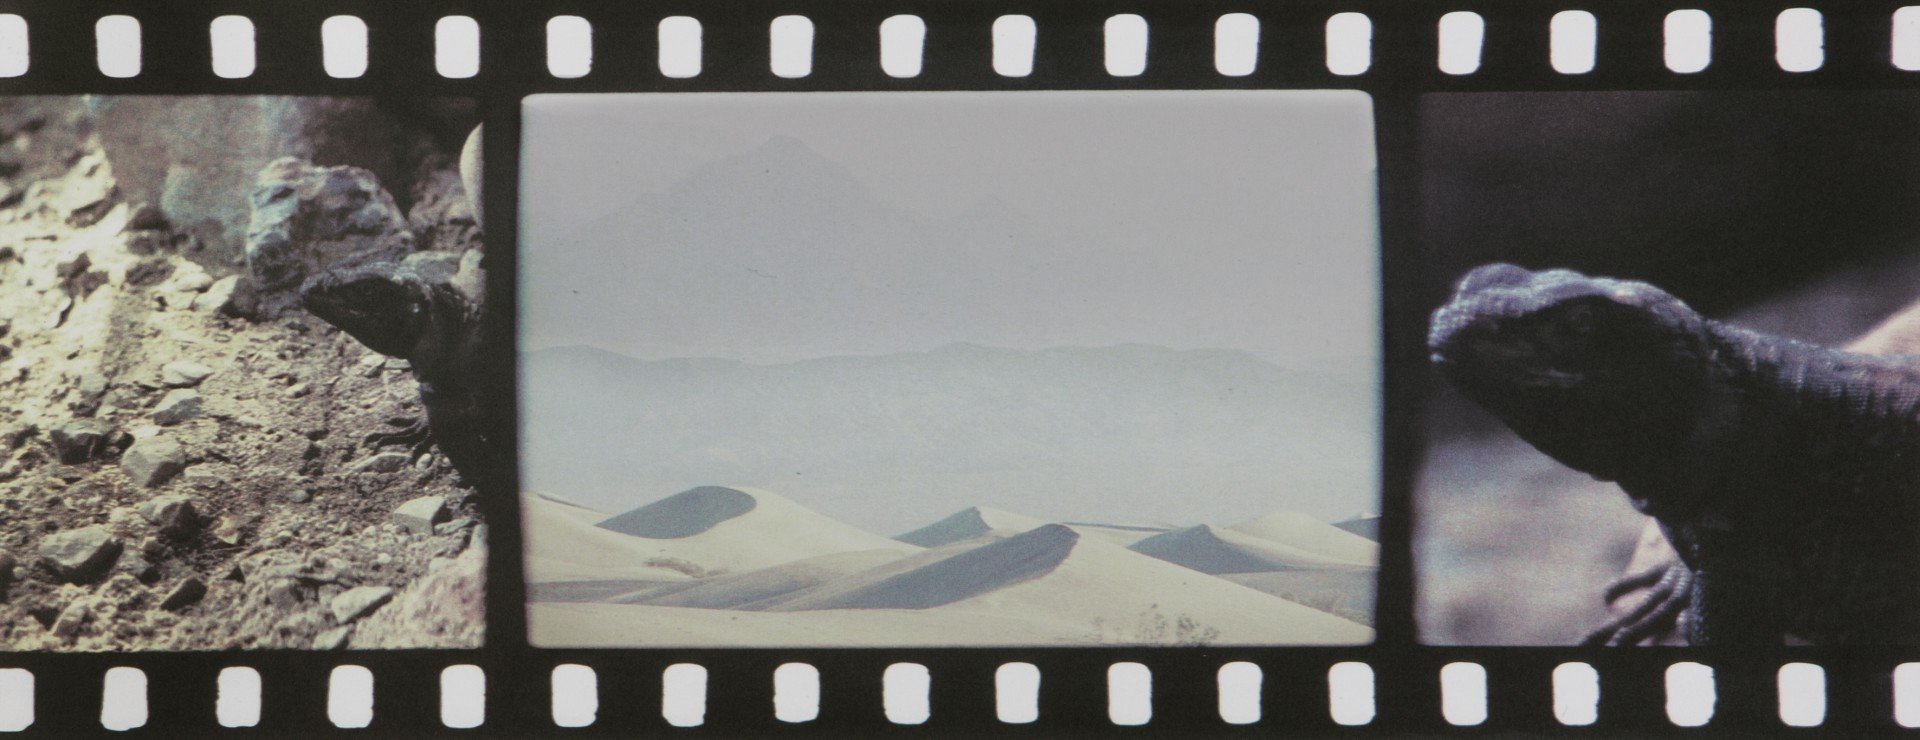 Tacita Dean, JG, 35 mm color and black and white anamorphic film with optical sound of 26 ½ minutes, 2013. Courtesy of Marian Goodman, Paris.